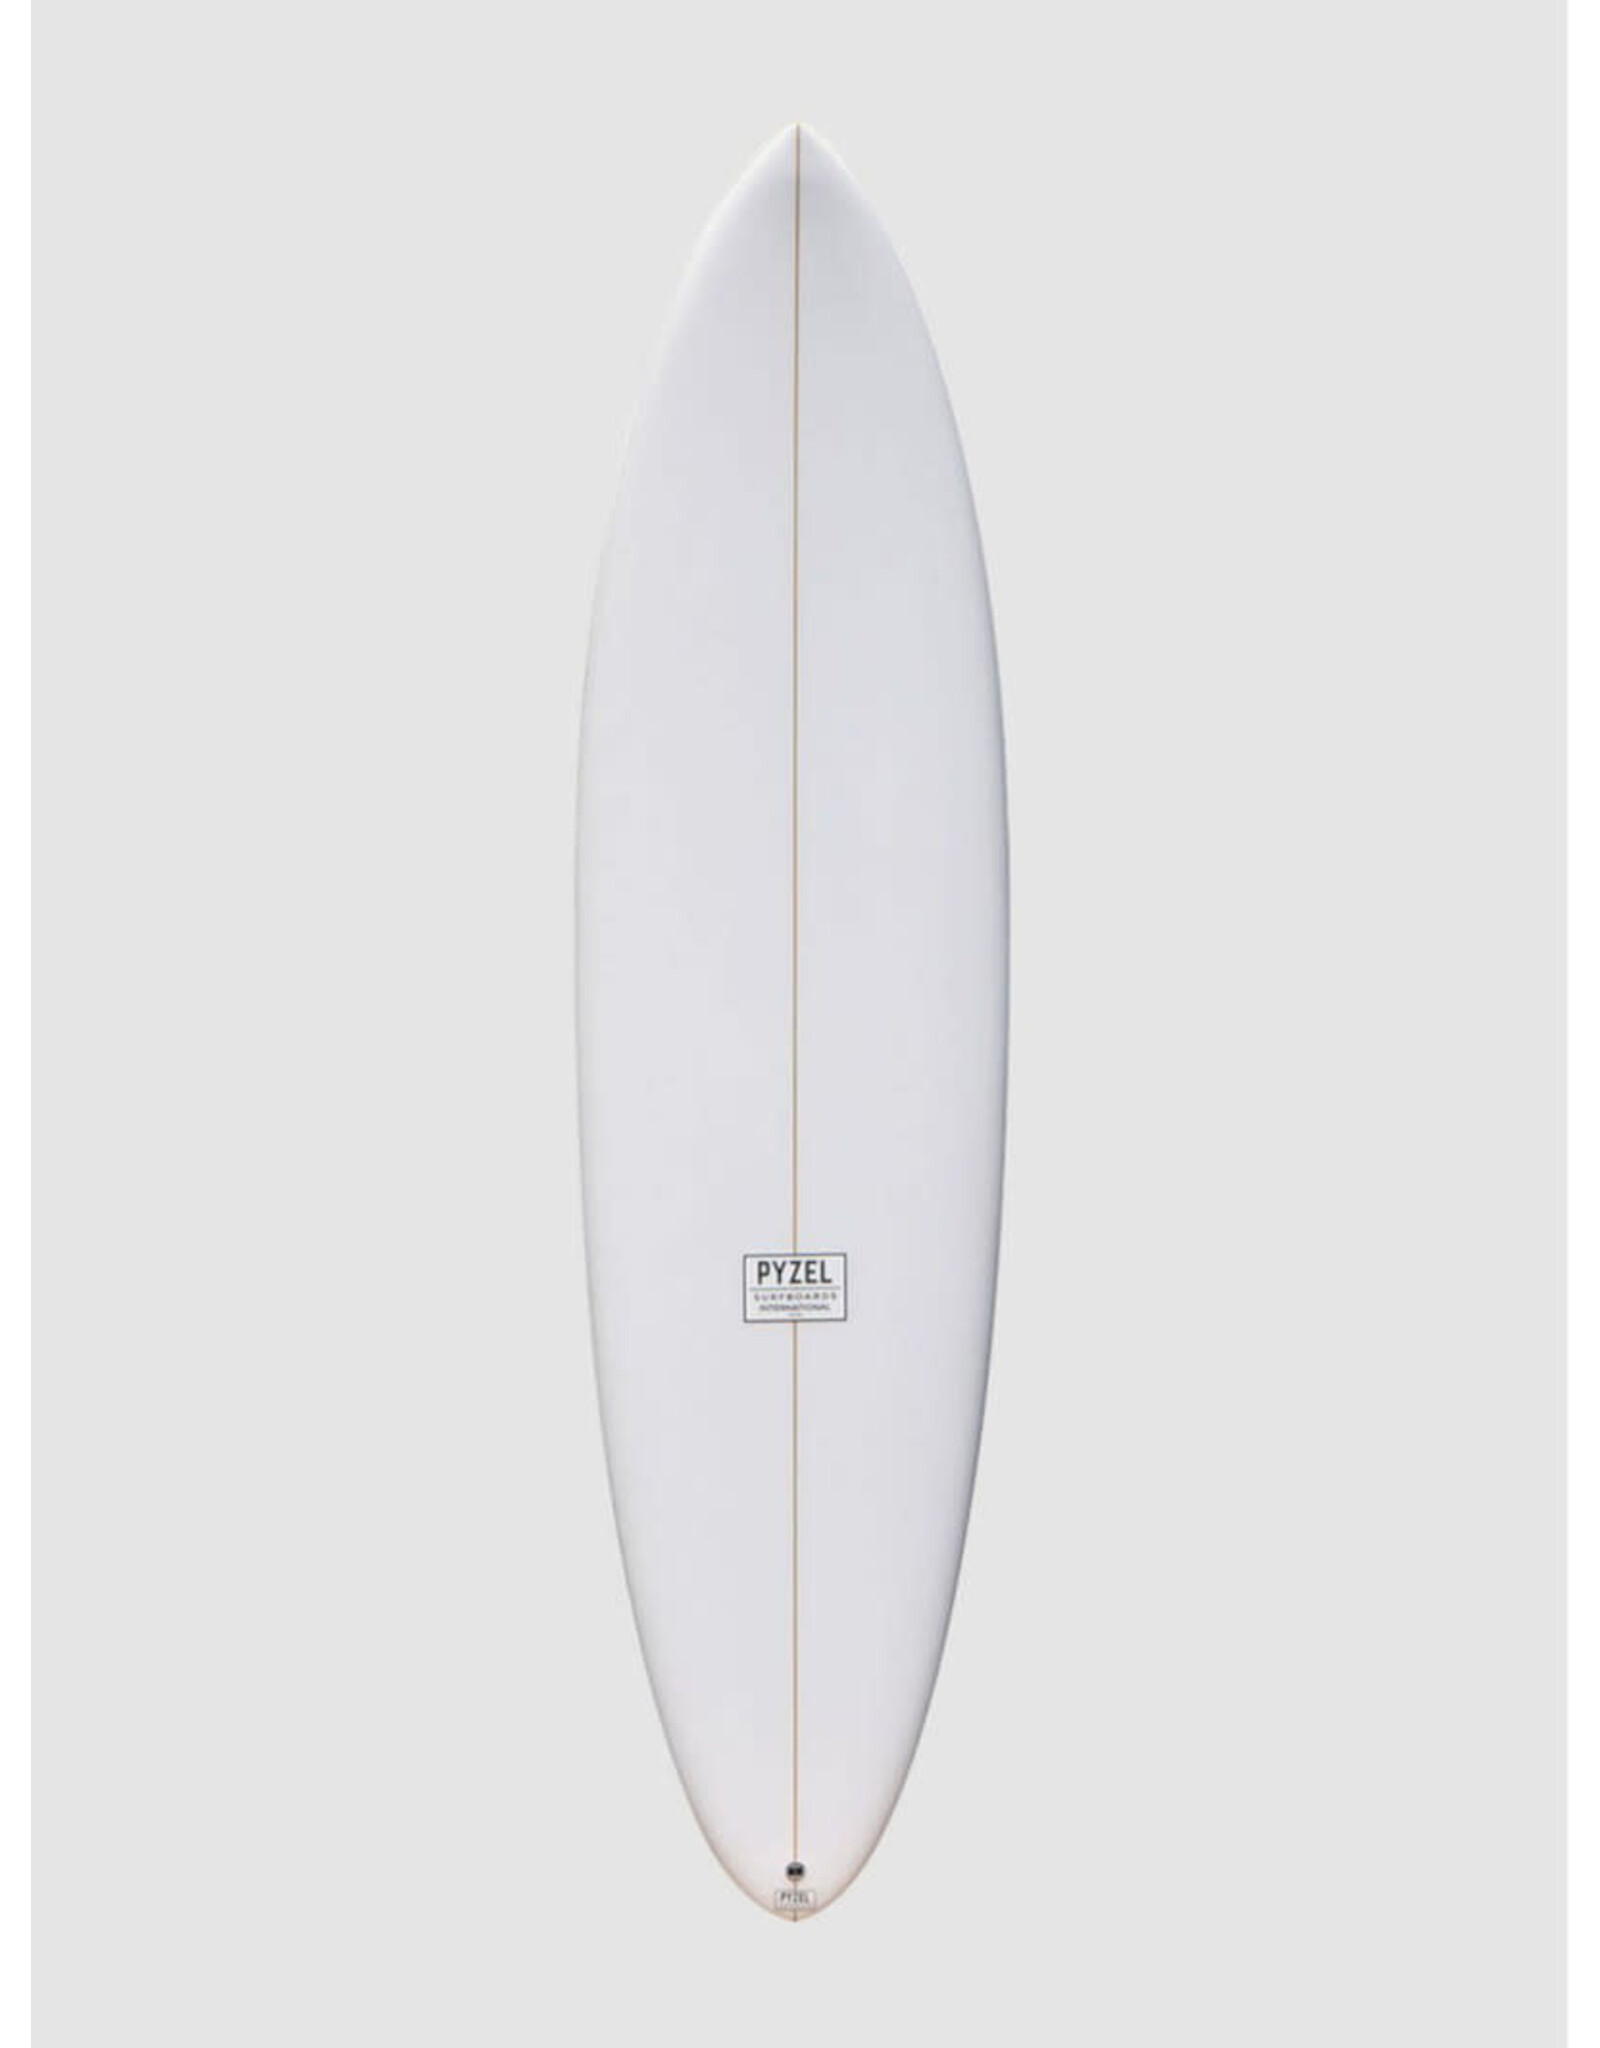 Pyzel Surfboards Pyzel 7'2" Mid length Crisis